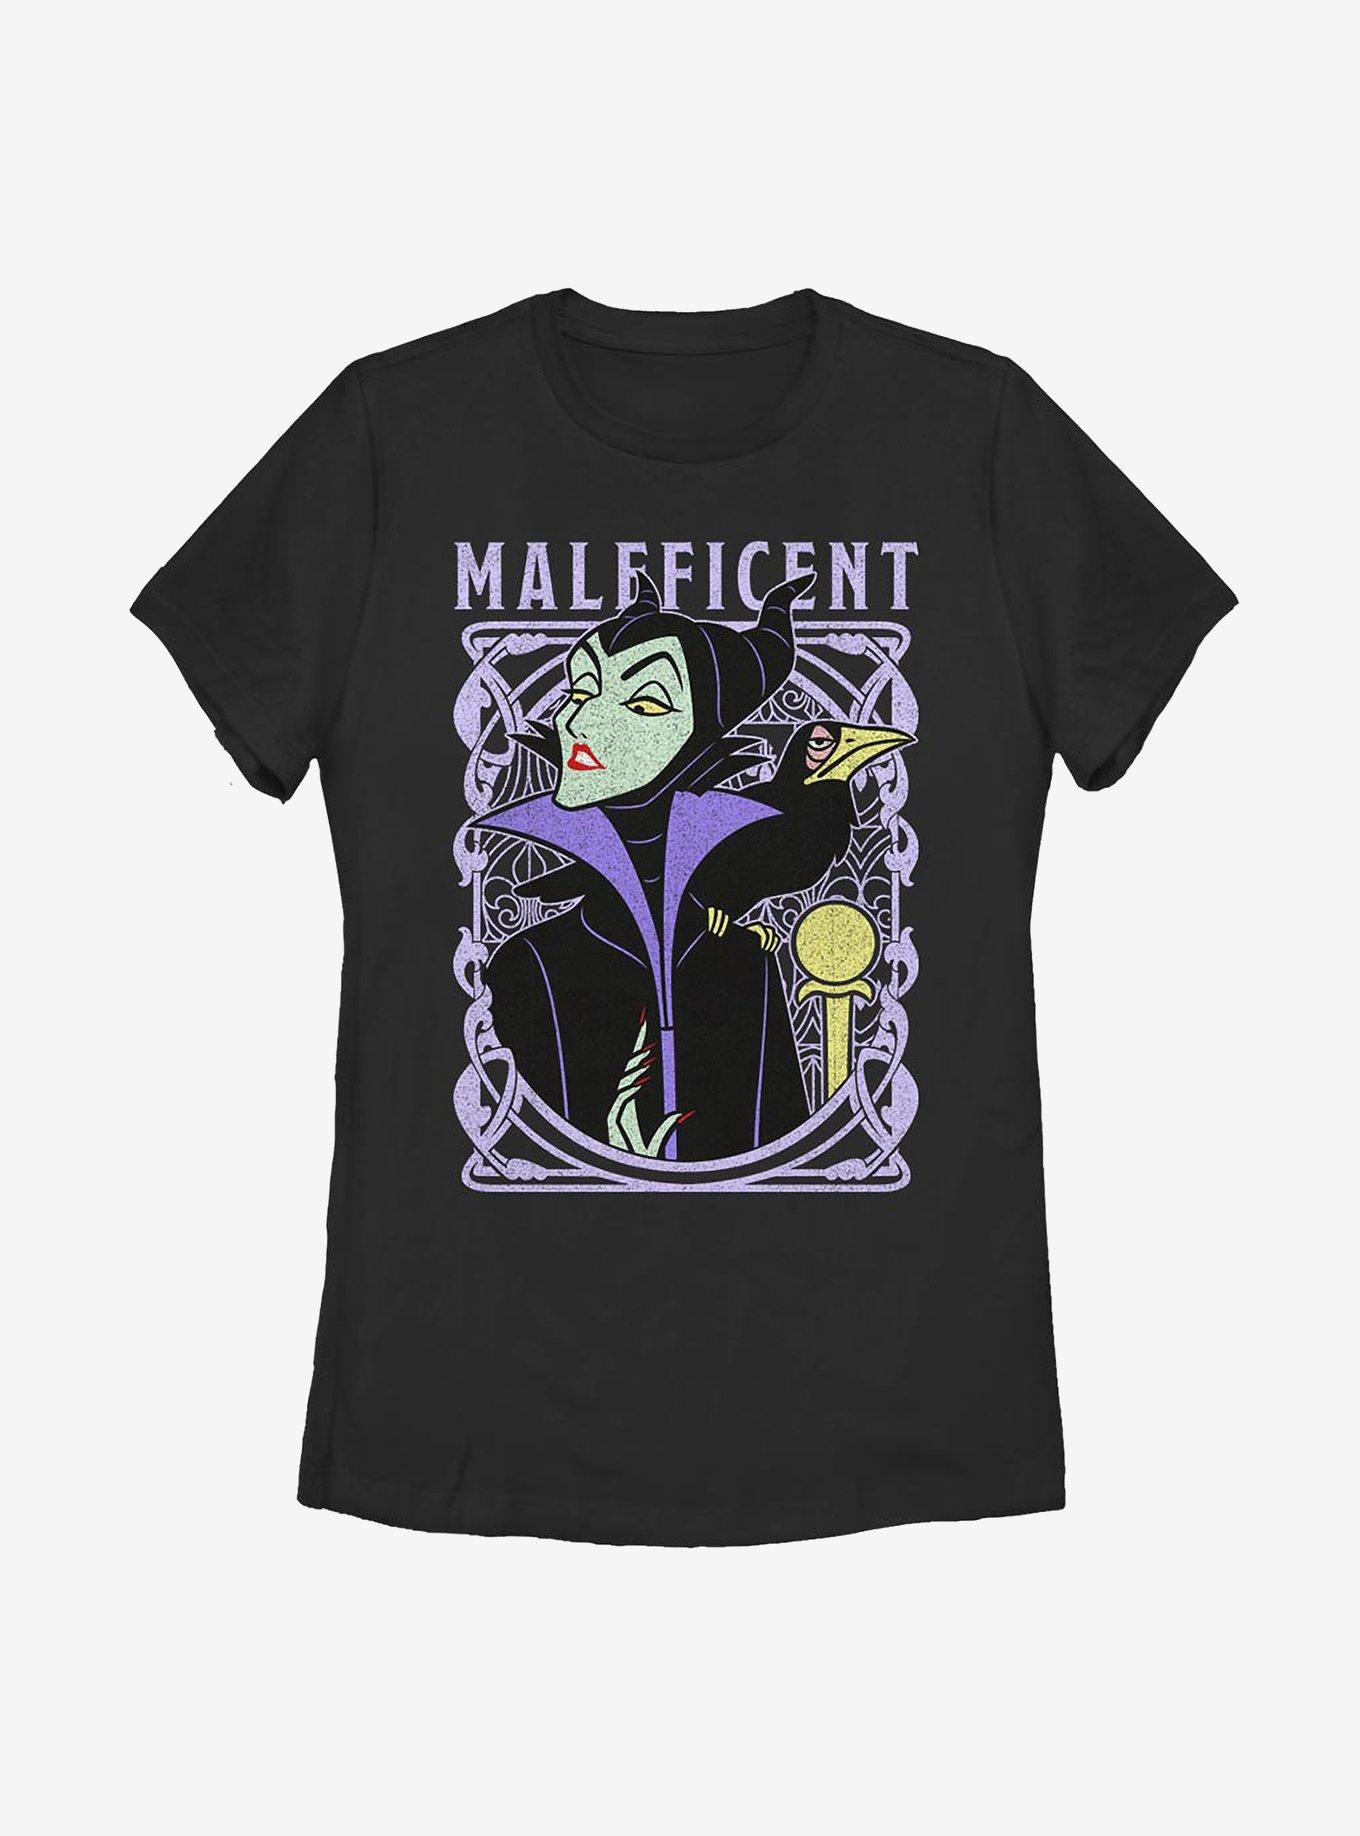 Disney Sleeping Beauty Maleficent Her Excellency Womens T-Shirt, , hi-res